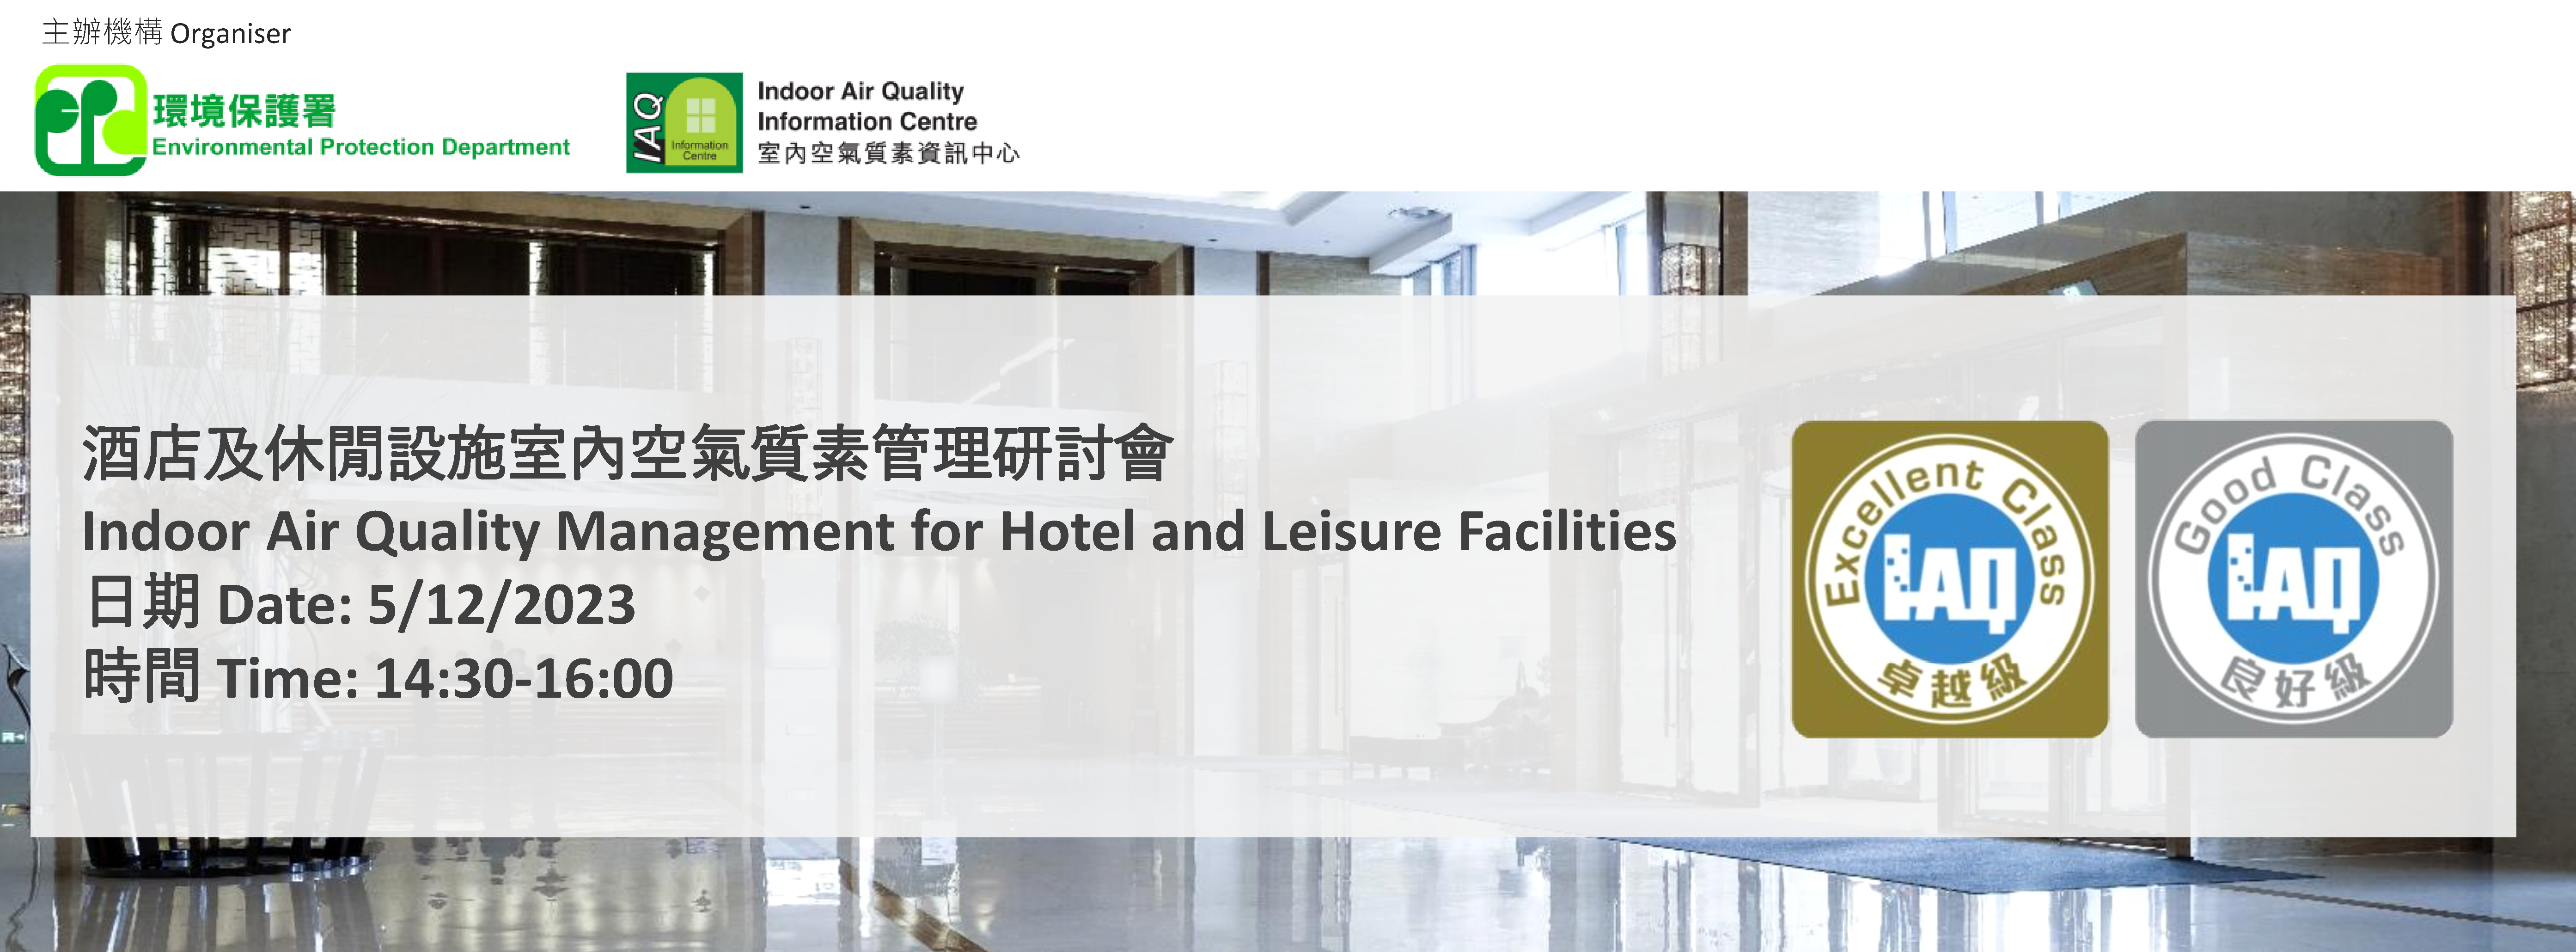 Indoor Air Quality Management for Hotel and Leisure Facilities